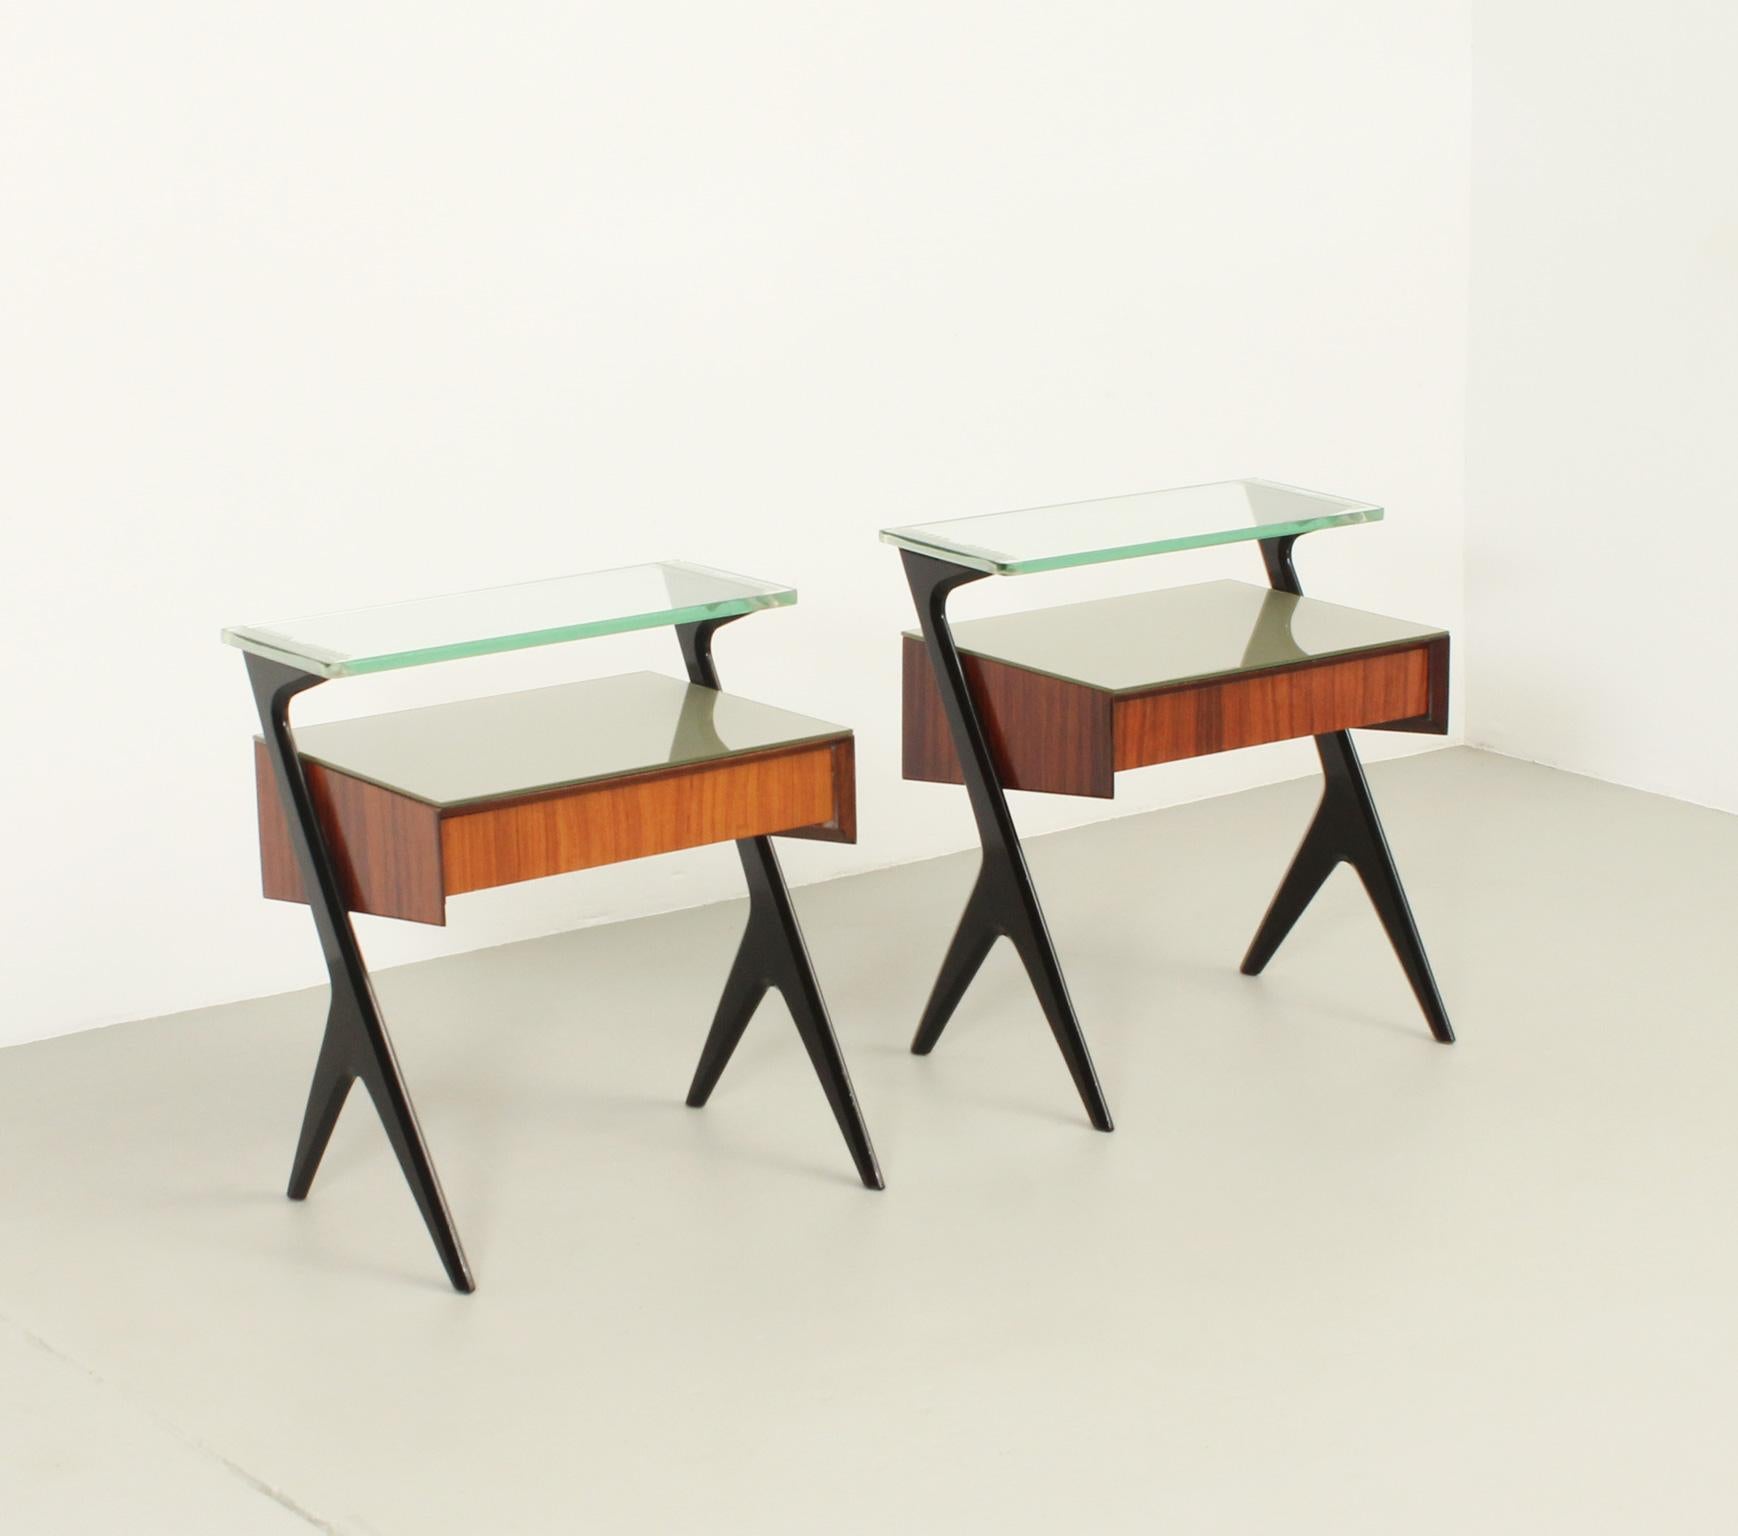 Pair of nightstands designed by Vittorio Dassi in 1950's, Italy. Rosewood veneer and black lacquered wood with original clear glass shelf with etched pattern and colored glass top. They retain the paper label from La Permanente di Cantú.